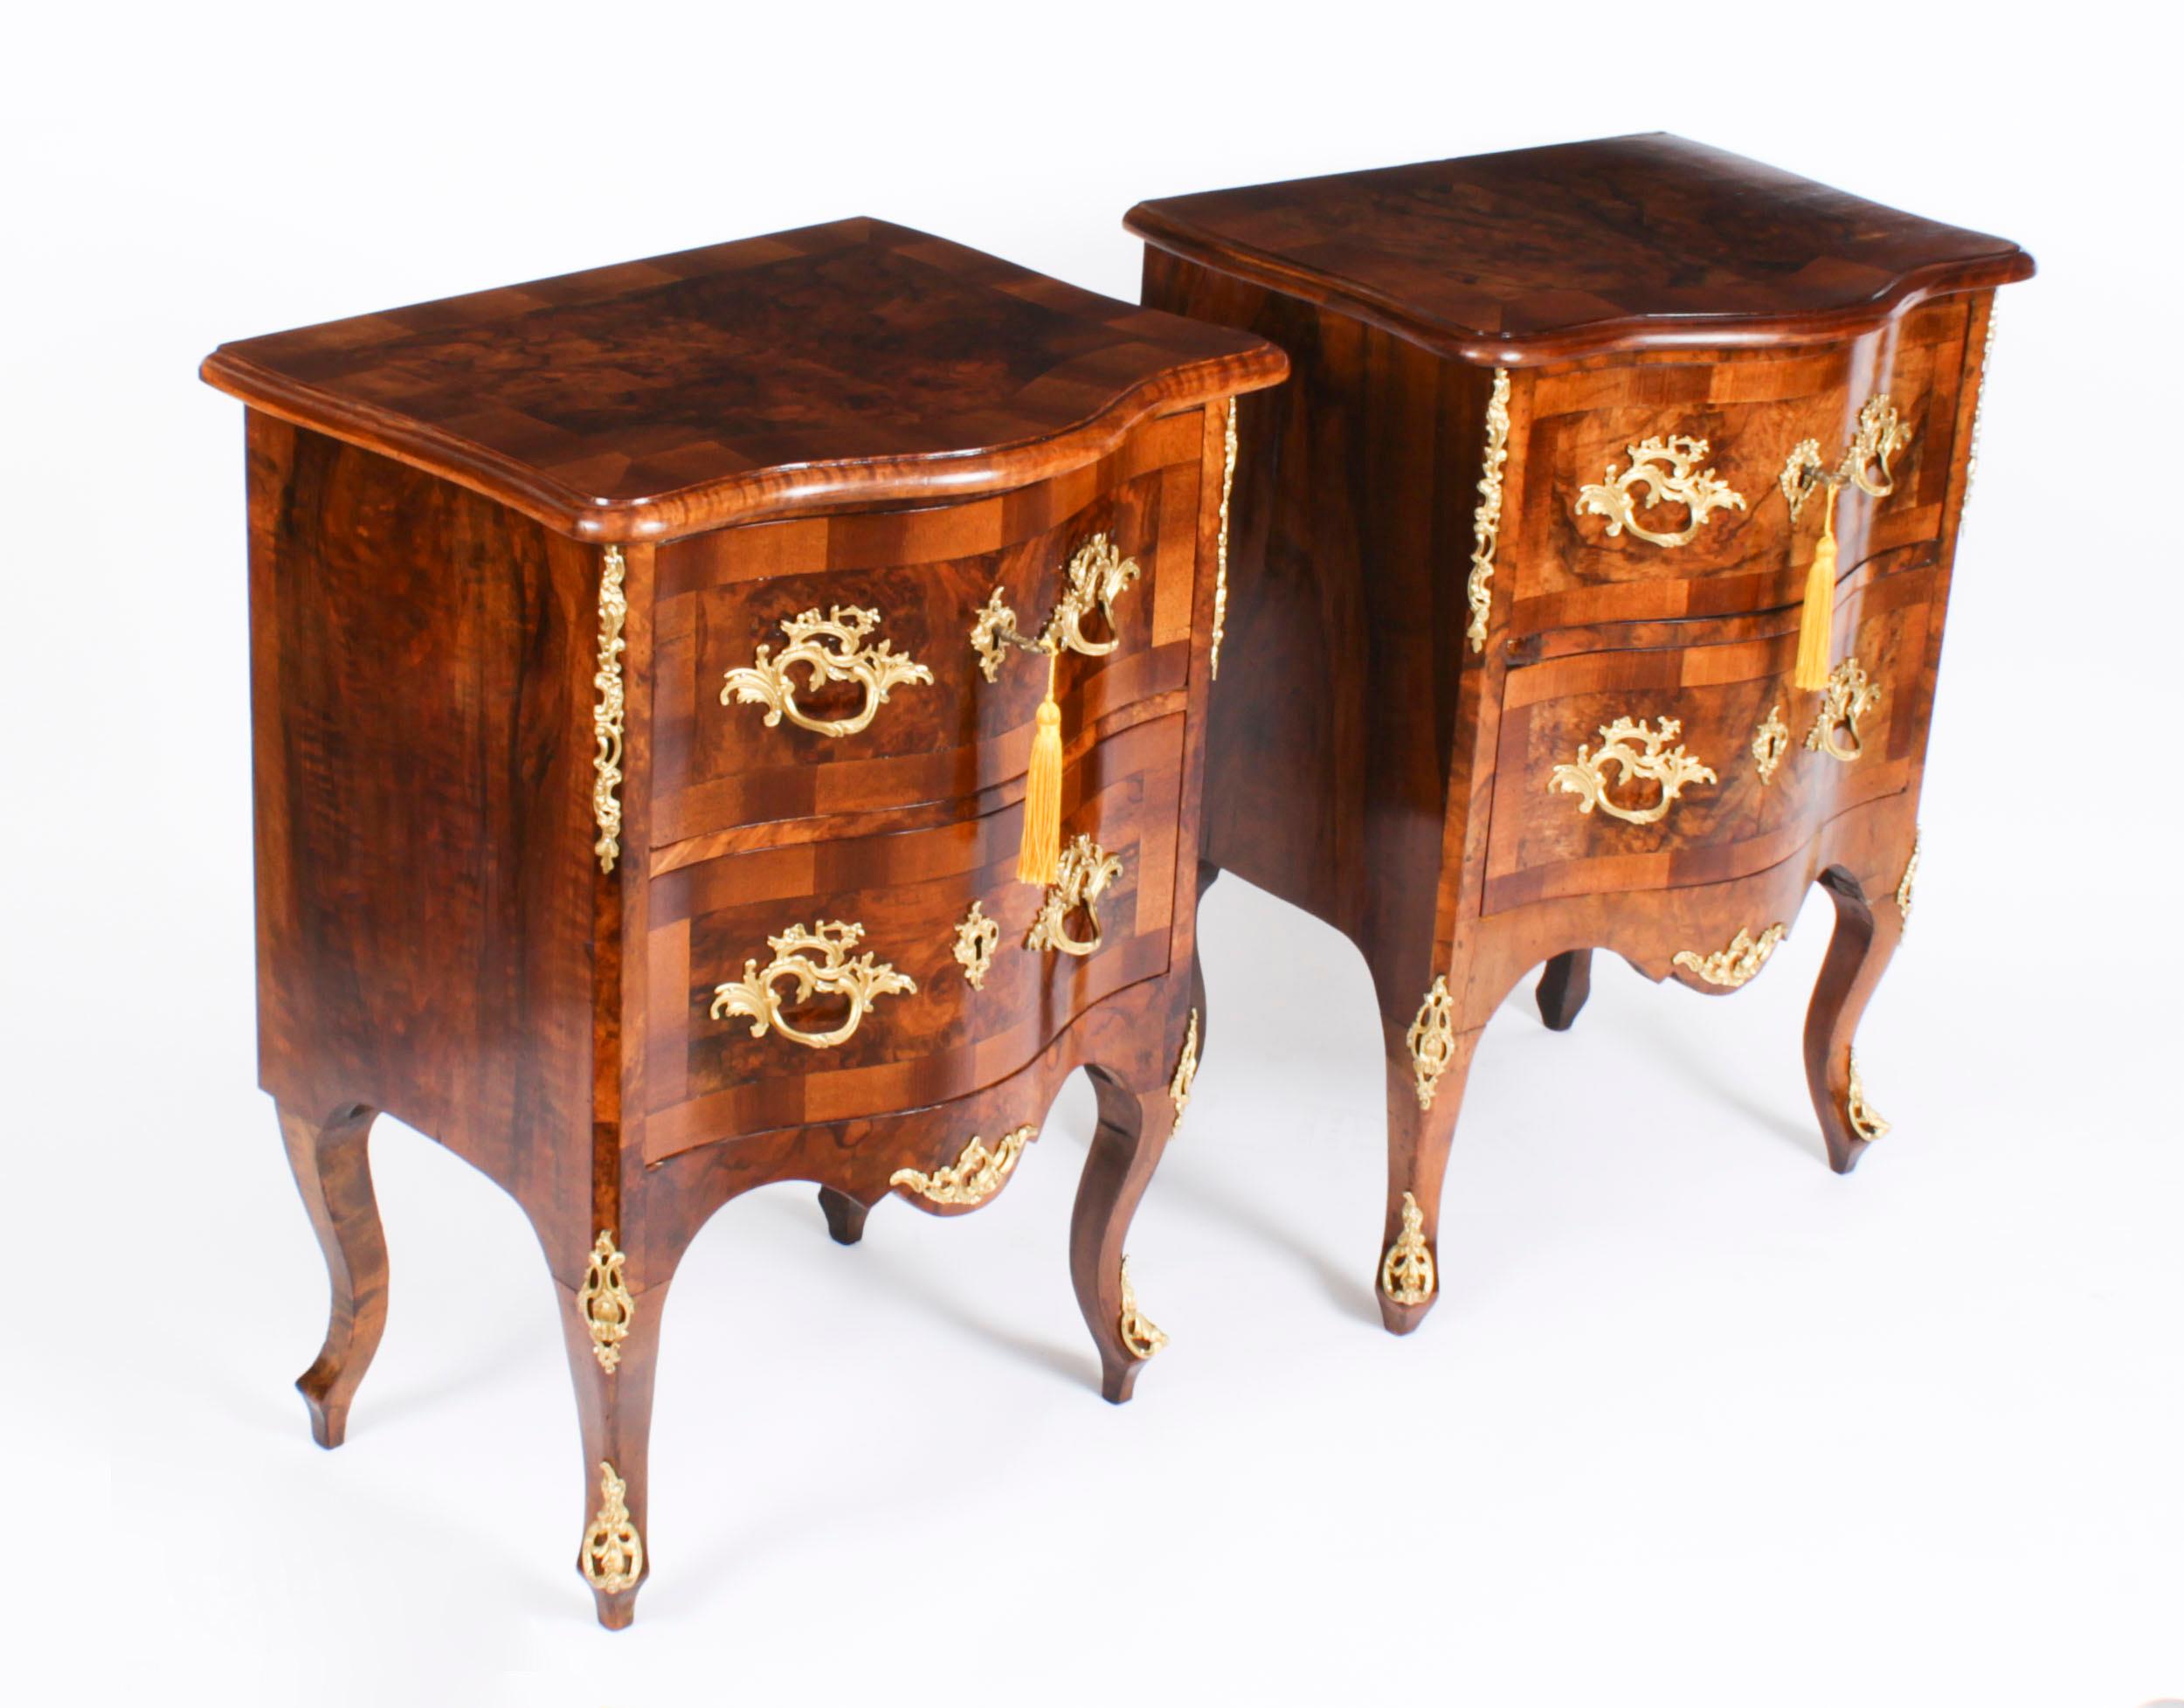 This is a stunning pair of Antique Italian burr walnut and ormolu mounted serpentine fronted Petite Commodes, or bedside chests, circa 1830 in date.
 
 They are crafted from the most beautiful burr walnut with decorative gilded ormolu mounts and